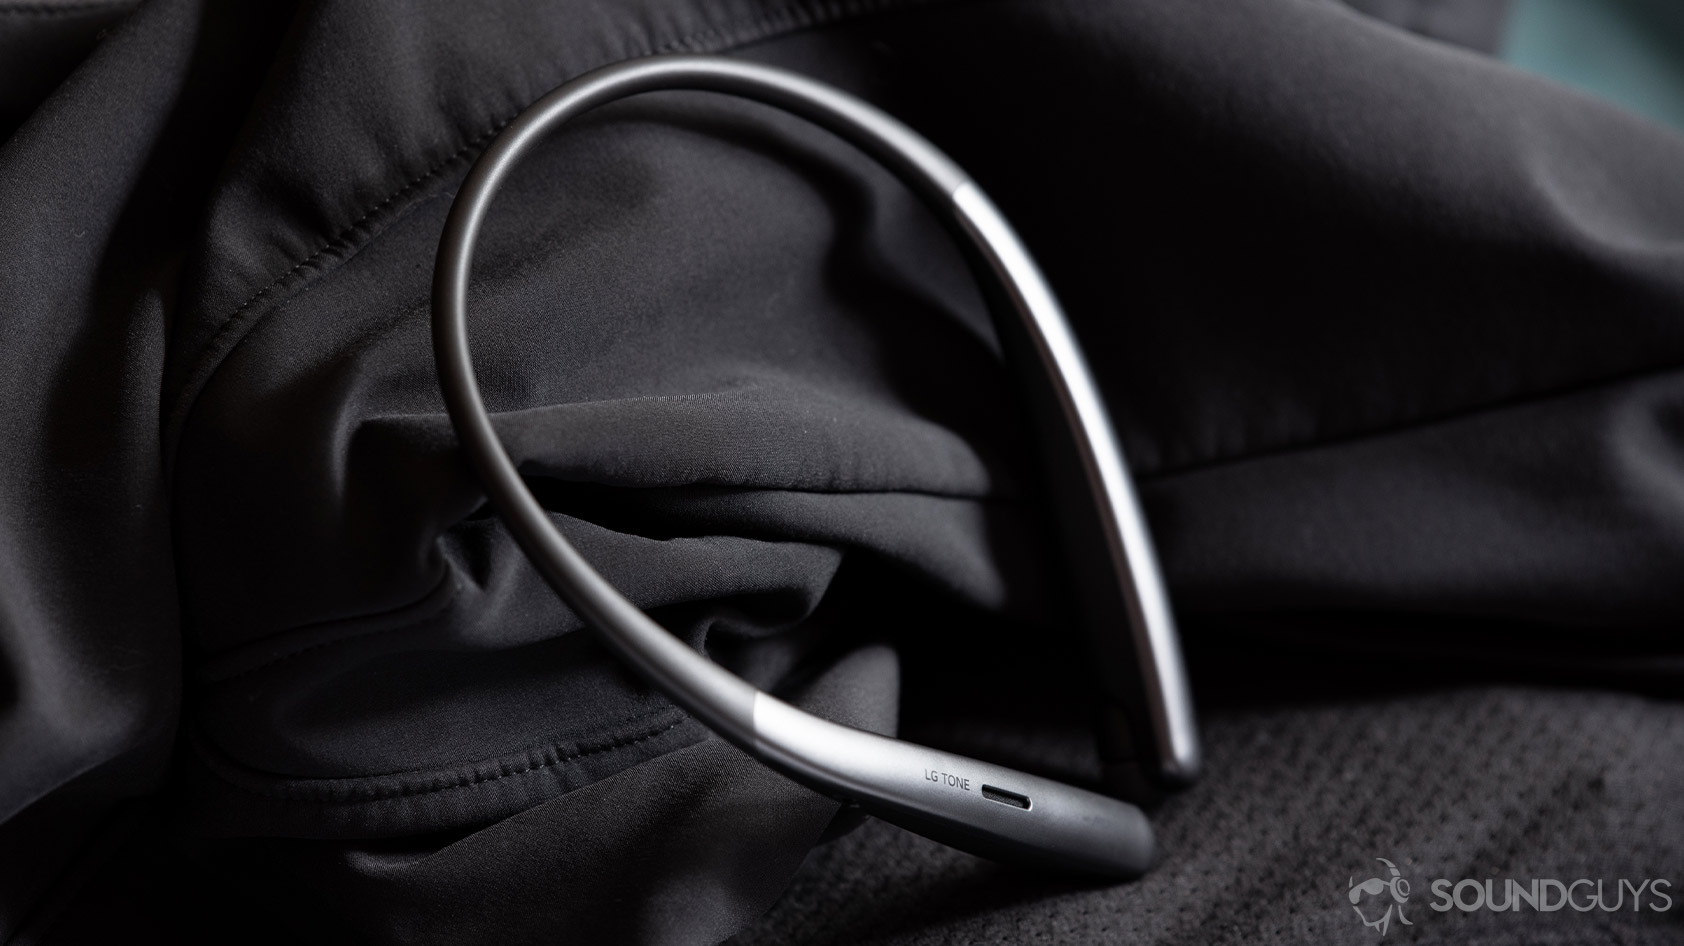 Angled, static image of the LG Tone Style SL6s wireless neckband earbuds on a black, textured surface.